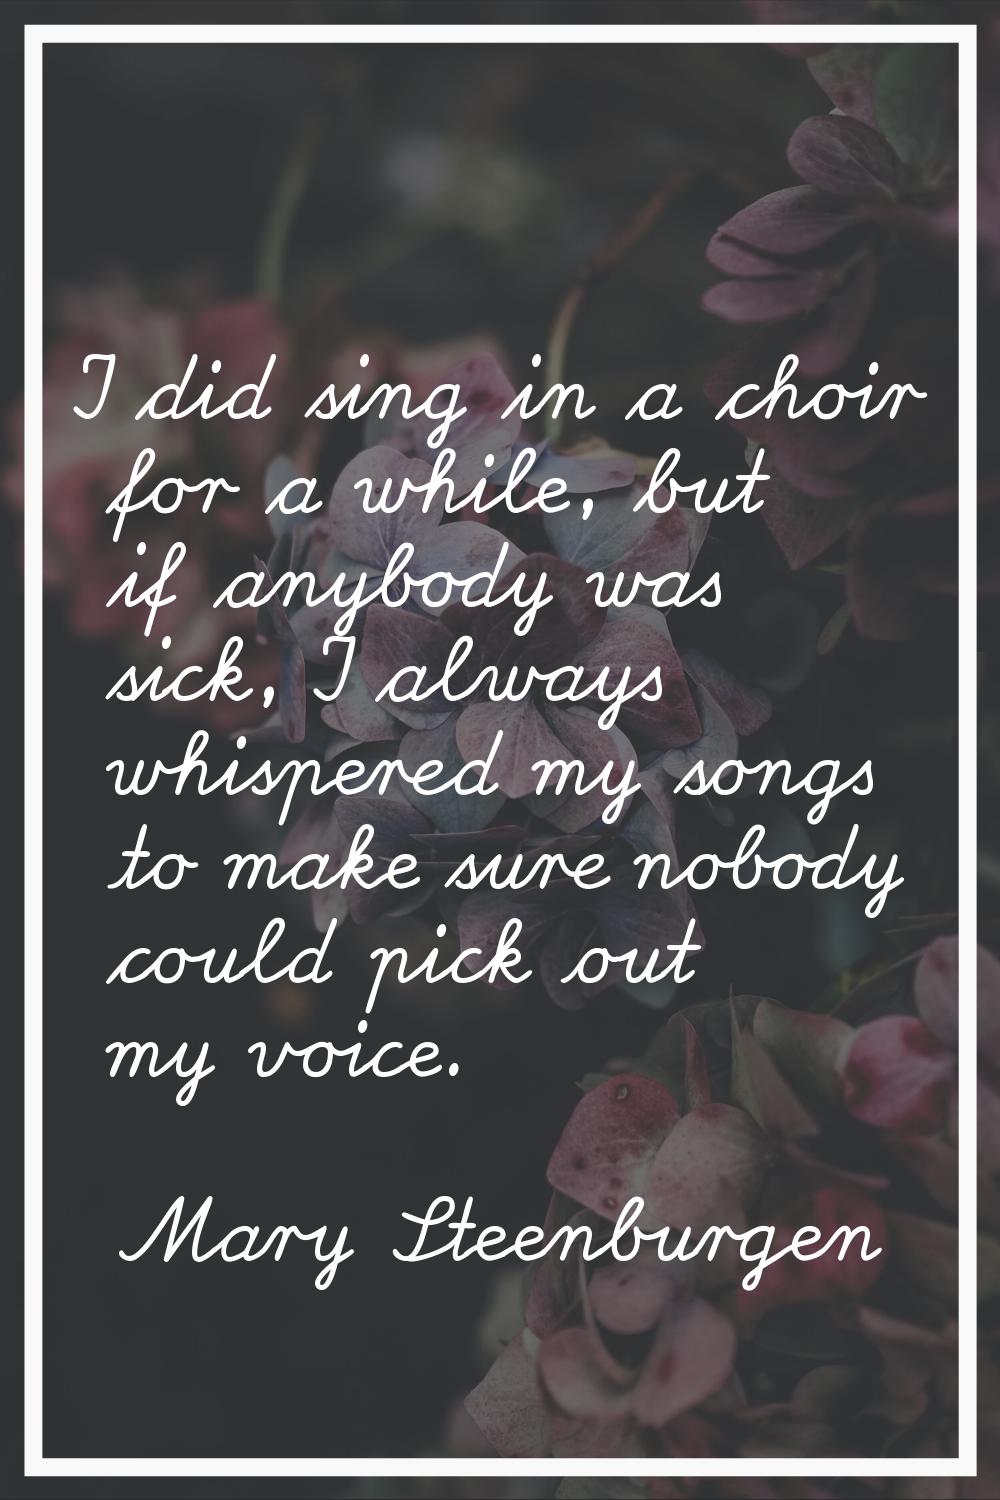 I did sing in a choir for a while, but if anybody was sick, I always whispered my songs to make sur